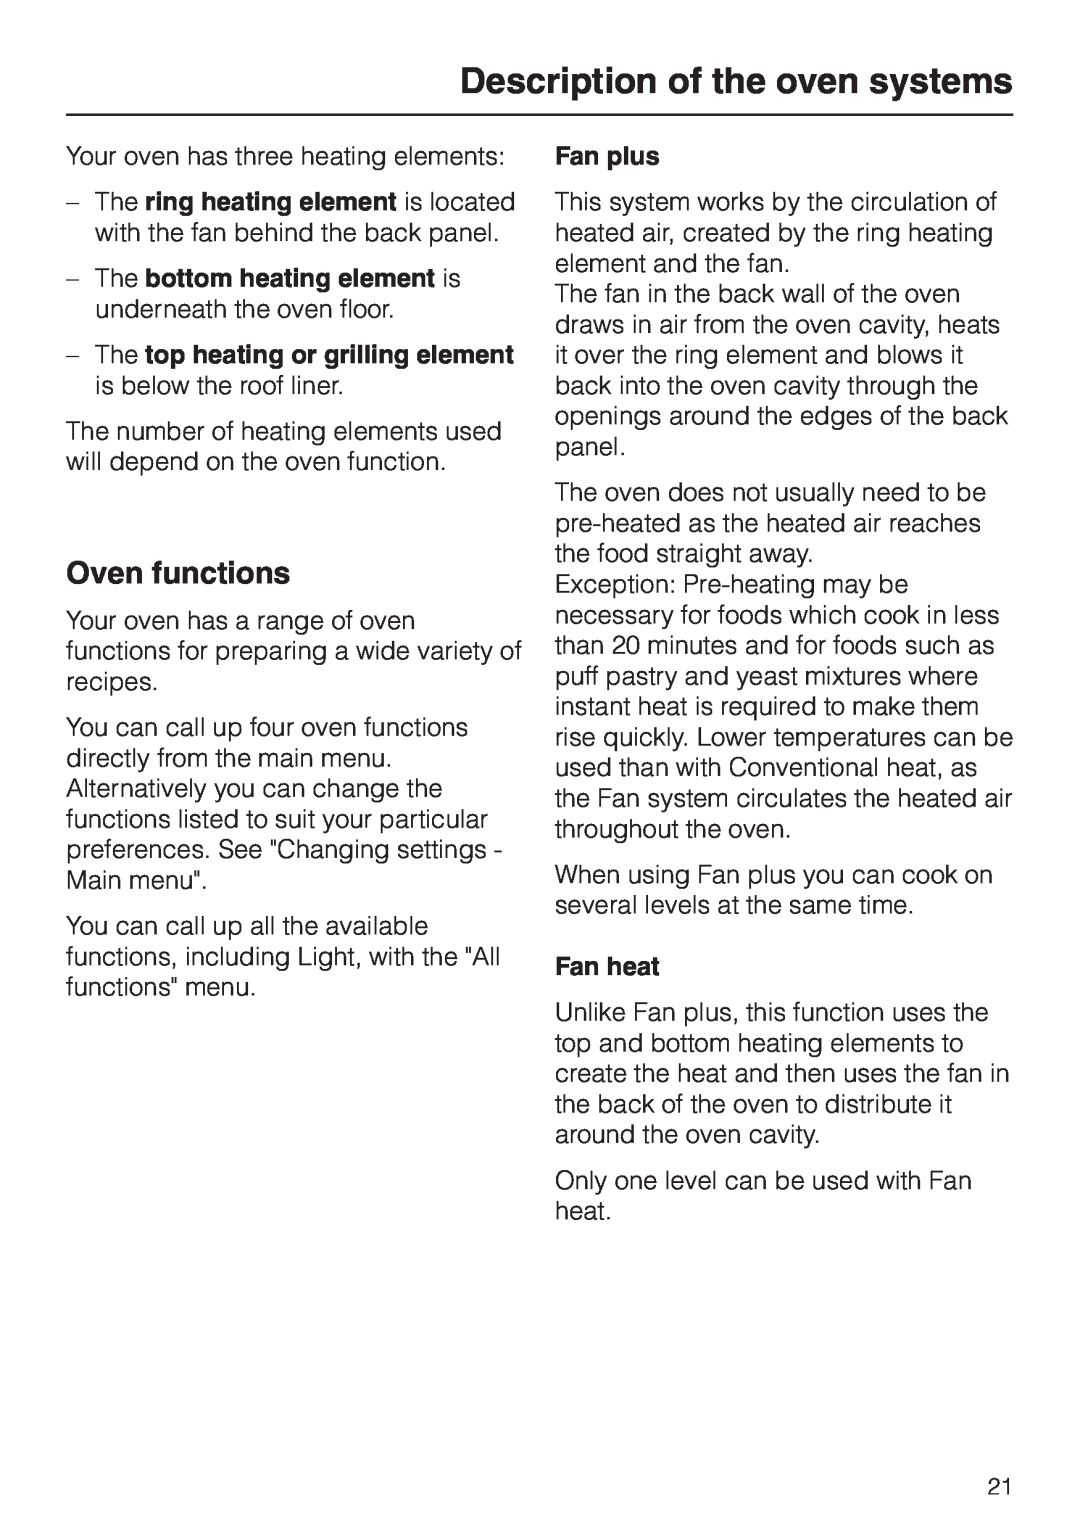 Miele H 4681 installation instructions Description of the oven systems, Oven functions, Fan plus, Fan heat 